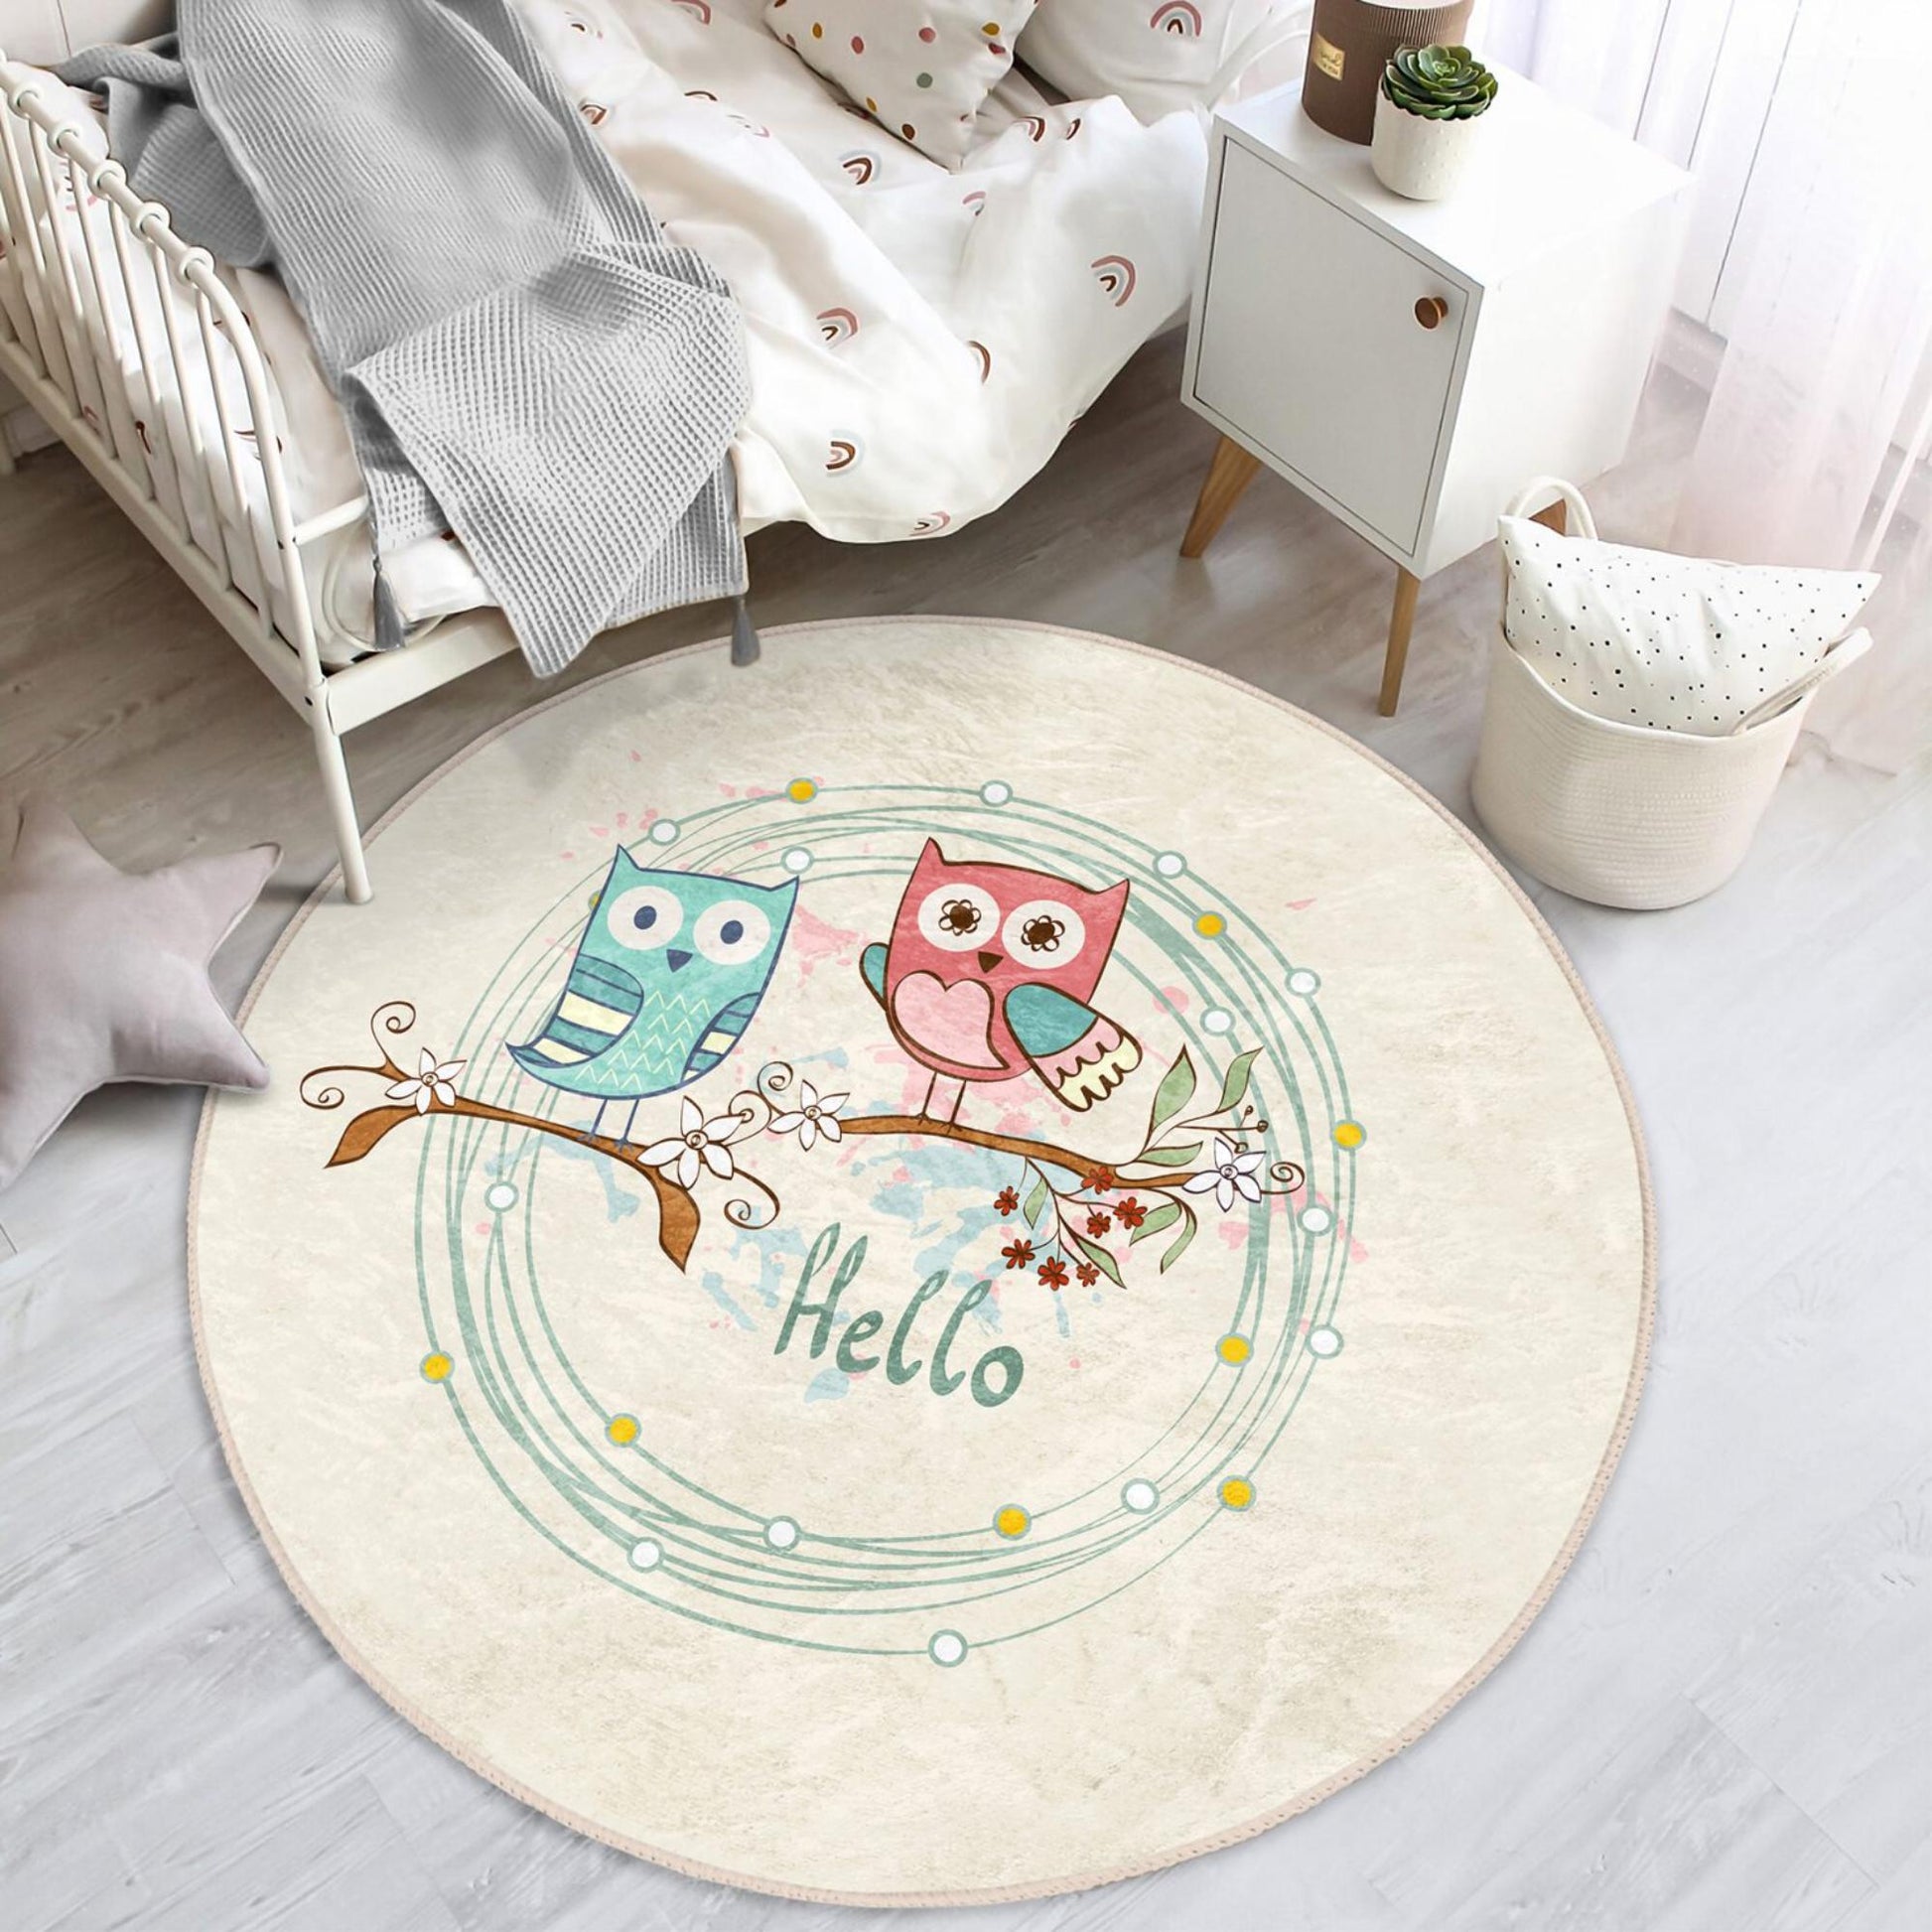 Whimsical kids rug showcasing delightful owls perched on the tree for playful decor.